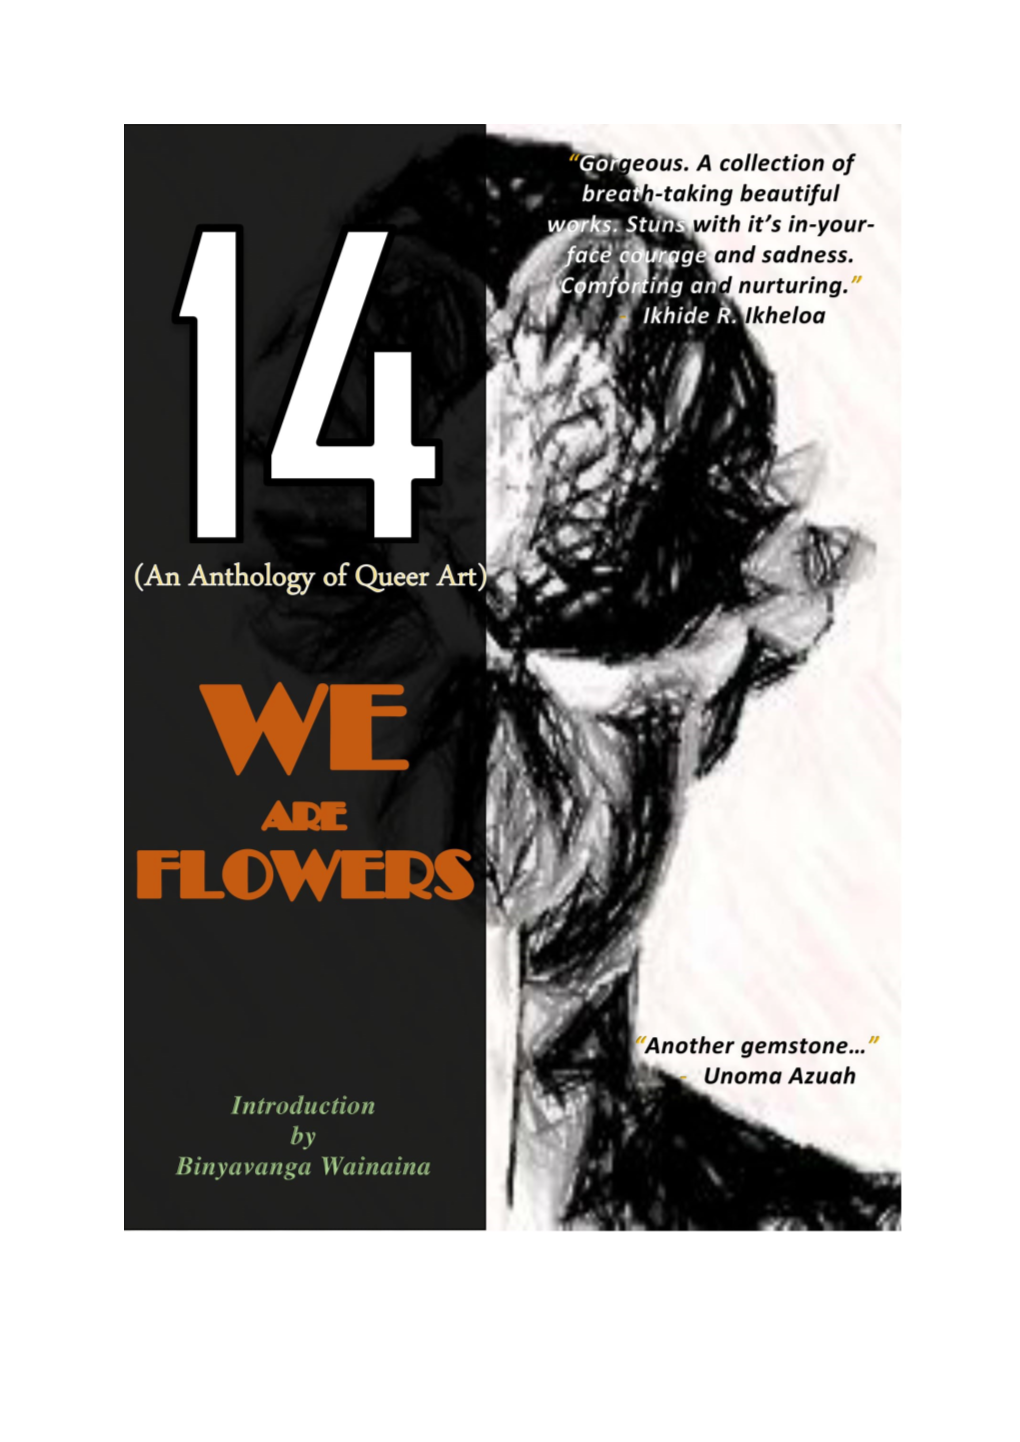 AN ANTHOLOGY of QUEER ART/We Are Flowers